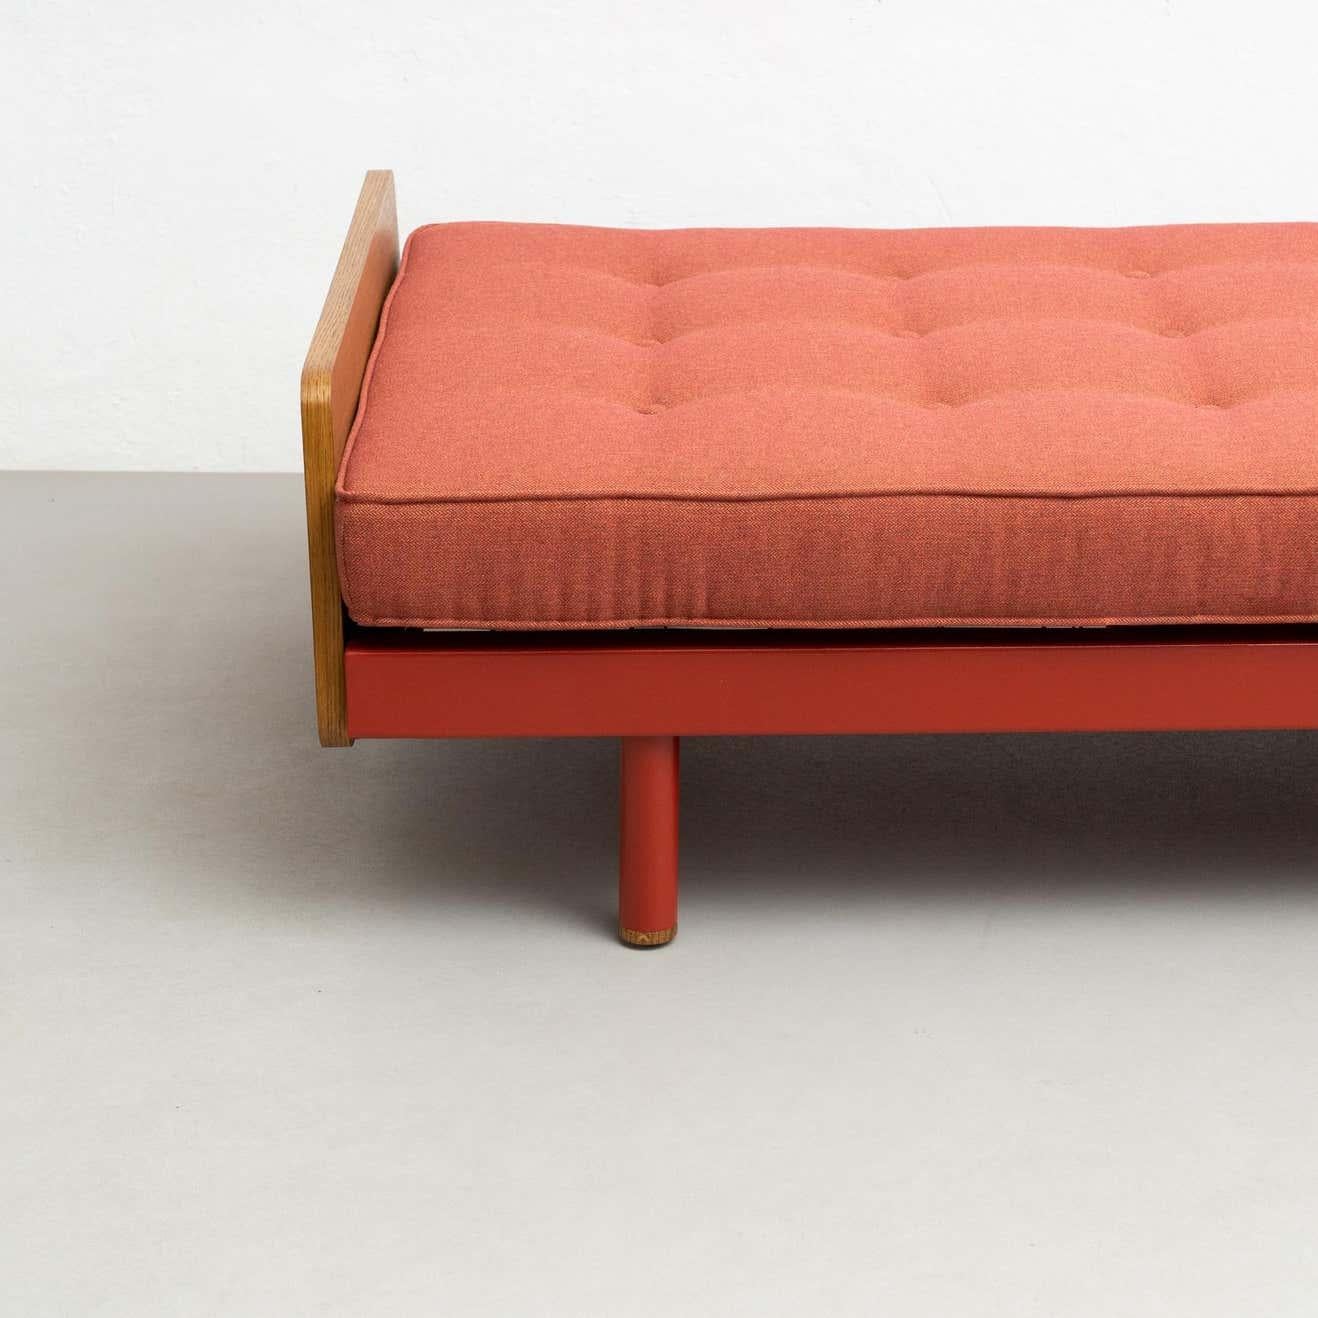 Metal Jean Prouve Mid-Century Modern S.C.A.L. Daybed, circa 1950